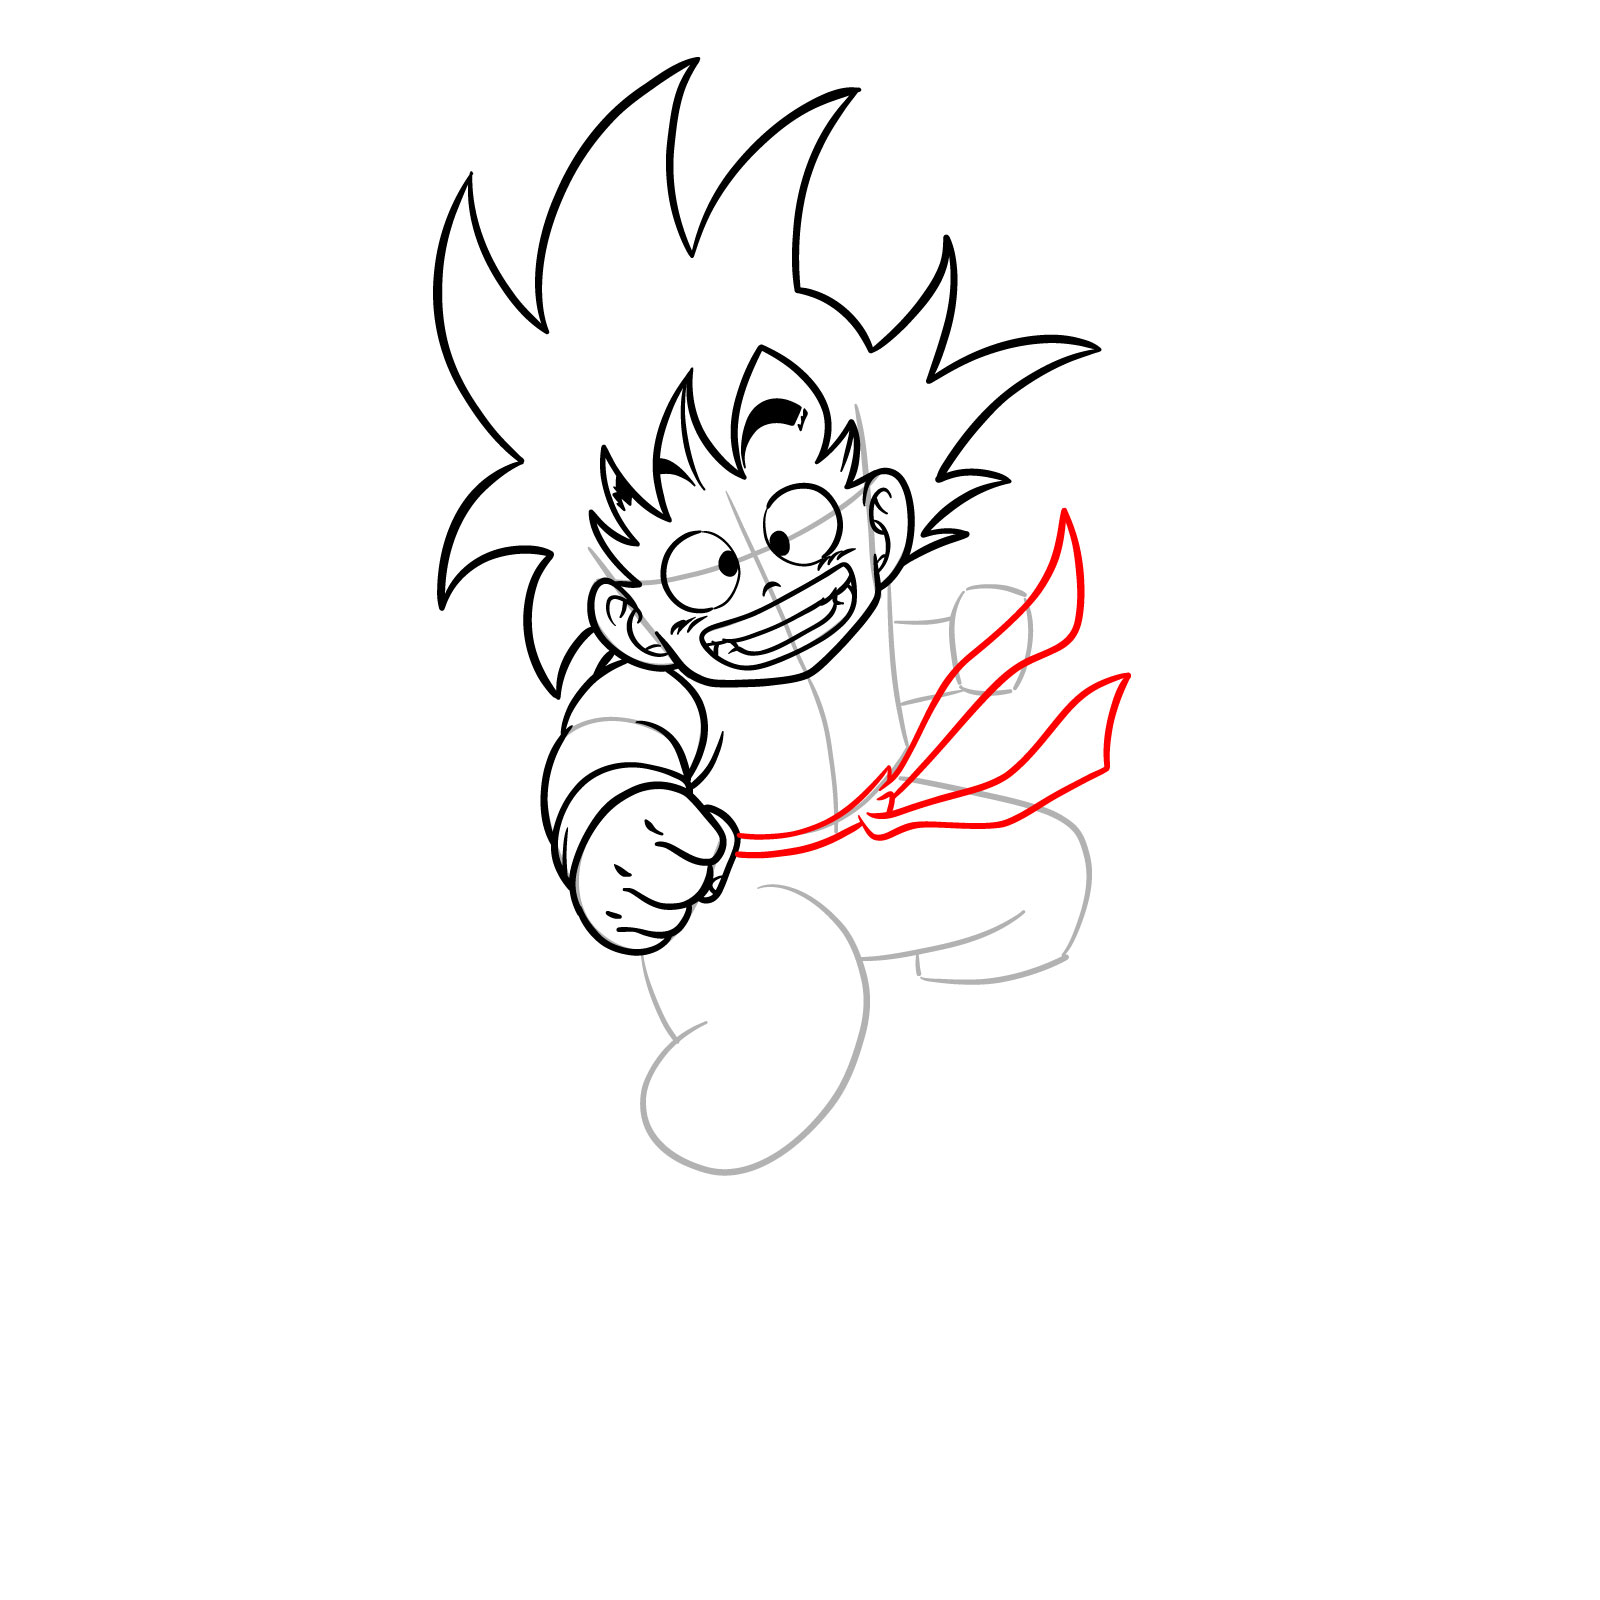 How to draw Kid Goku riding on the Flying Nimbus - step 14